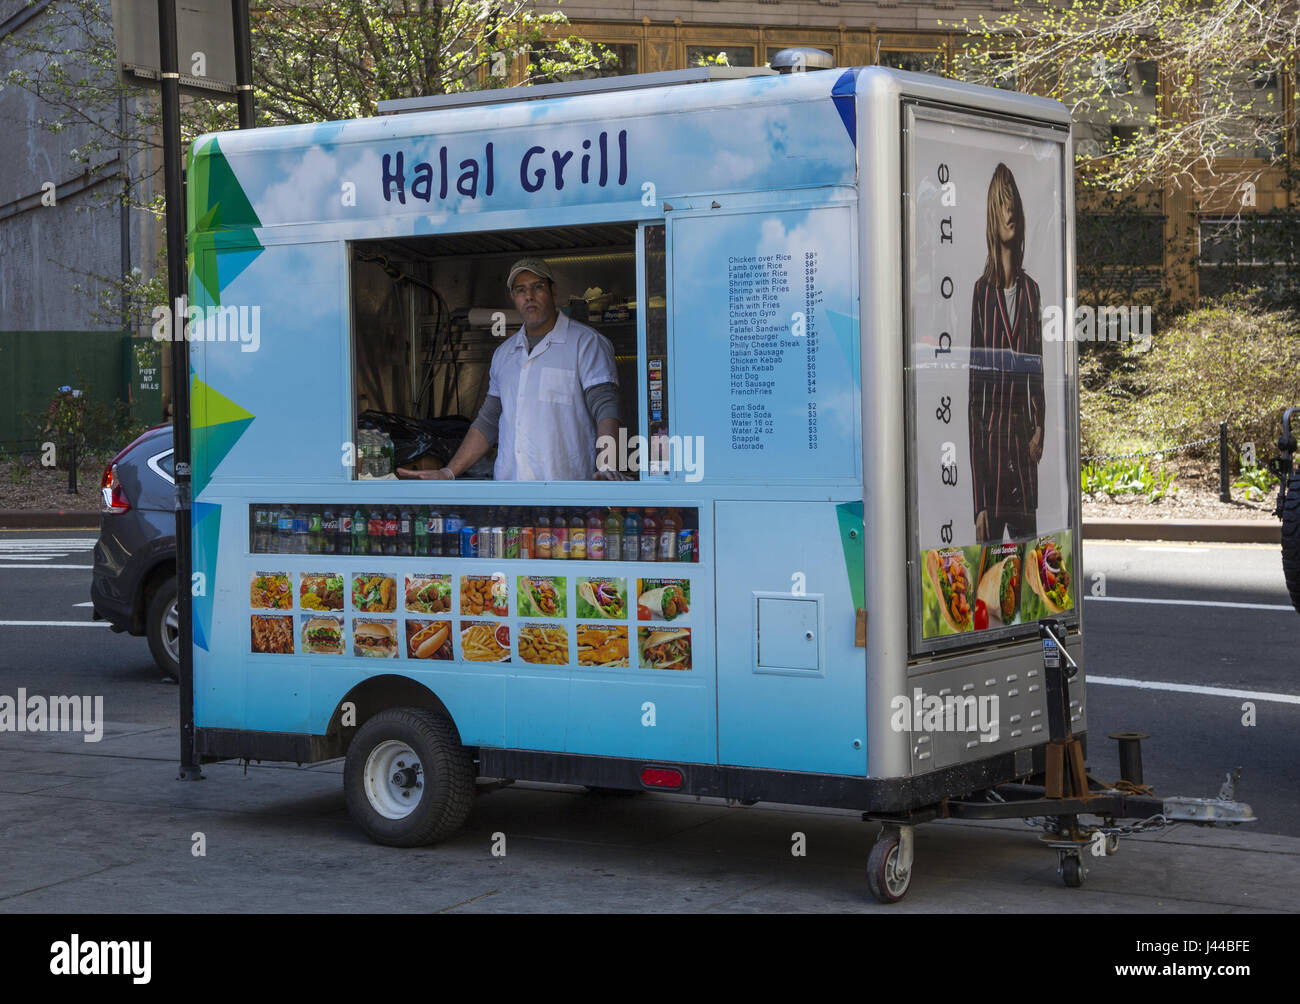 Halal food vendor on the street with his snazzy street kitchen in downtown Manhattan, NYC. Stock Photo